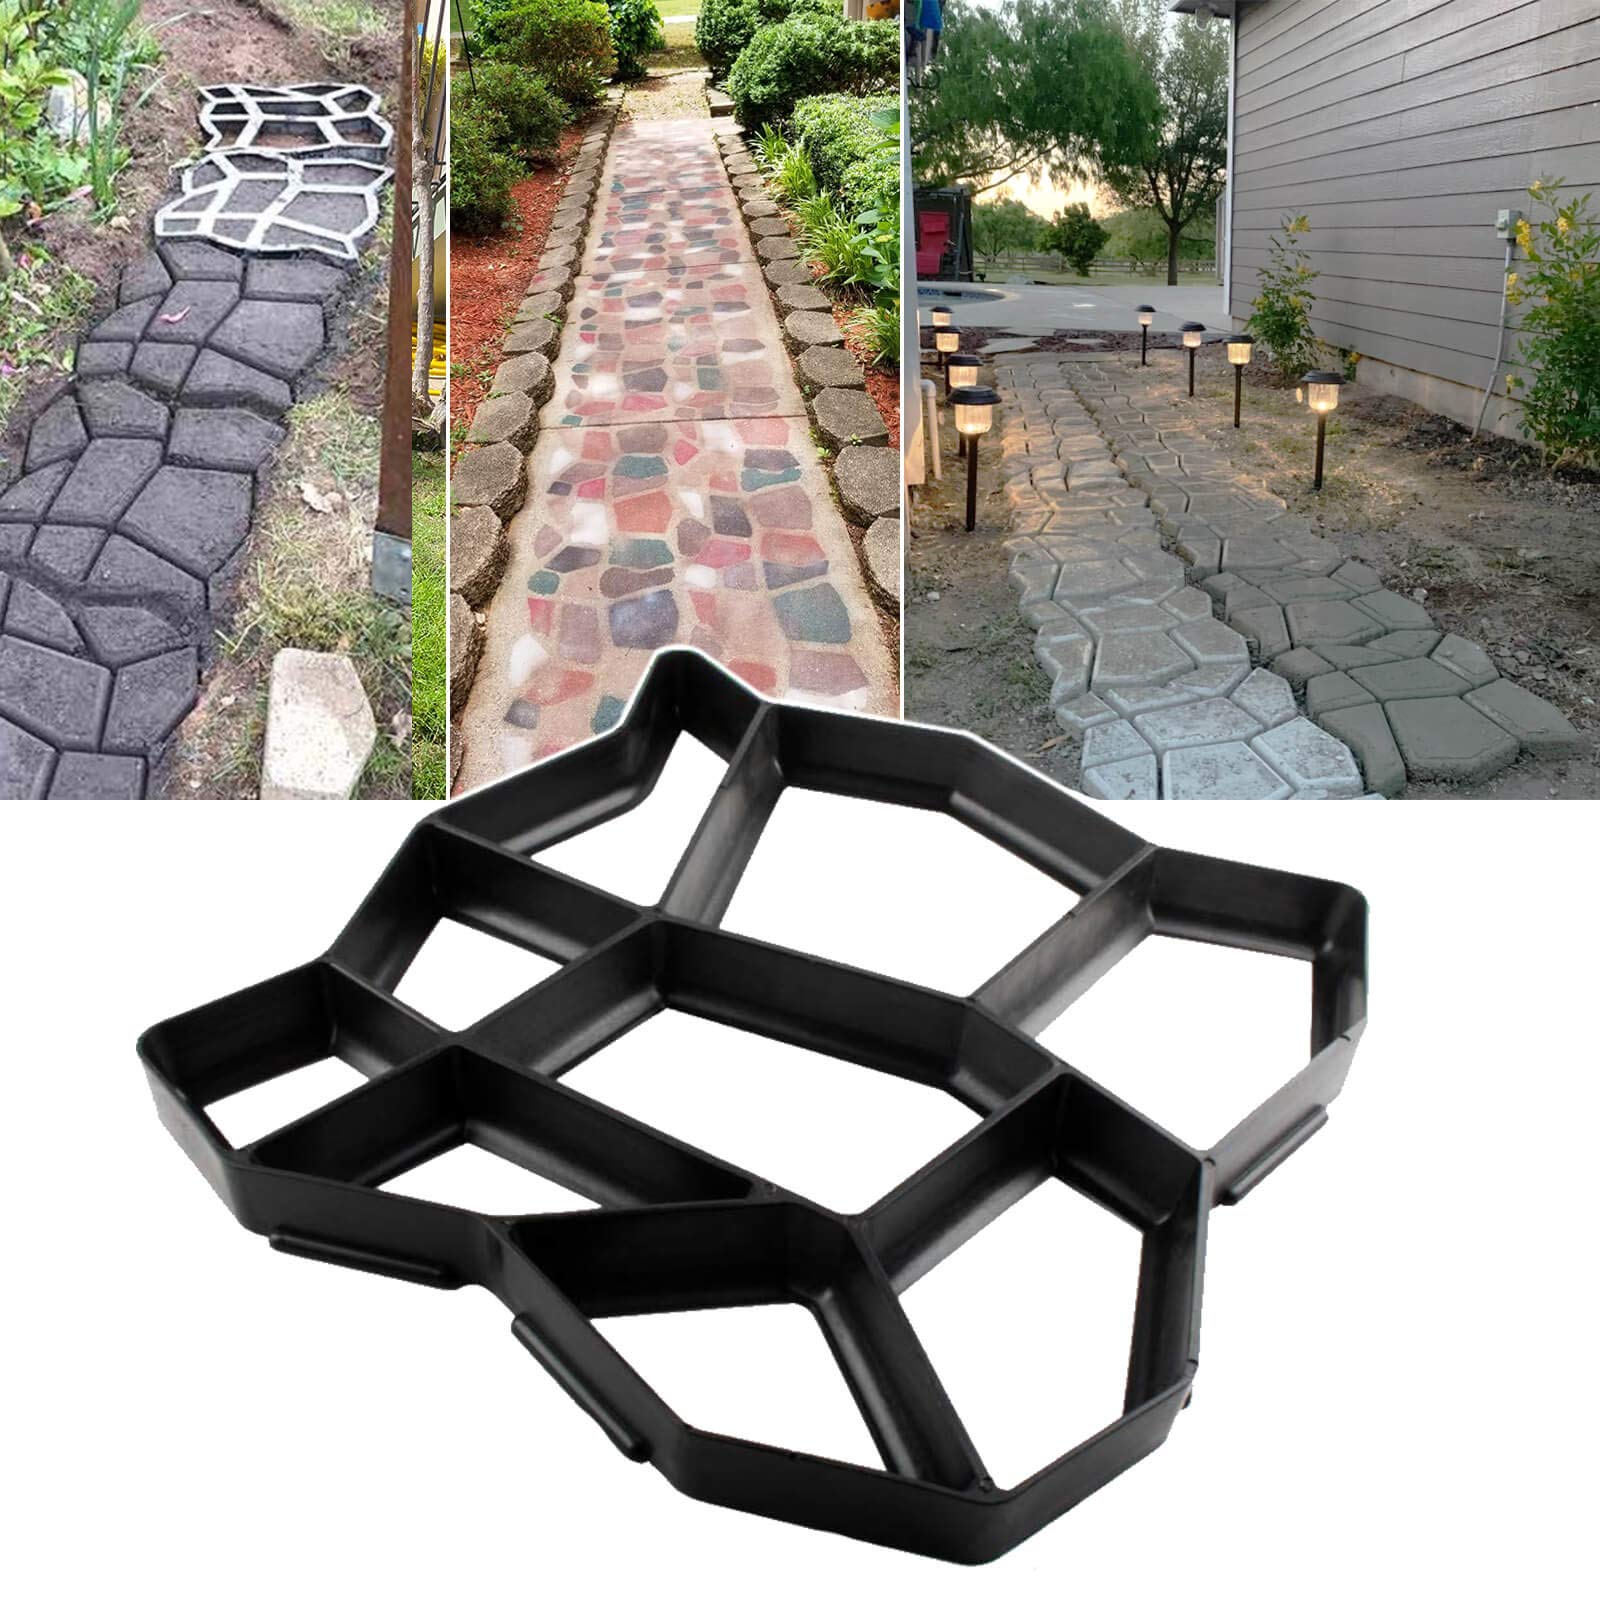 How to use paving molds for garden paths